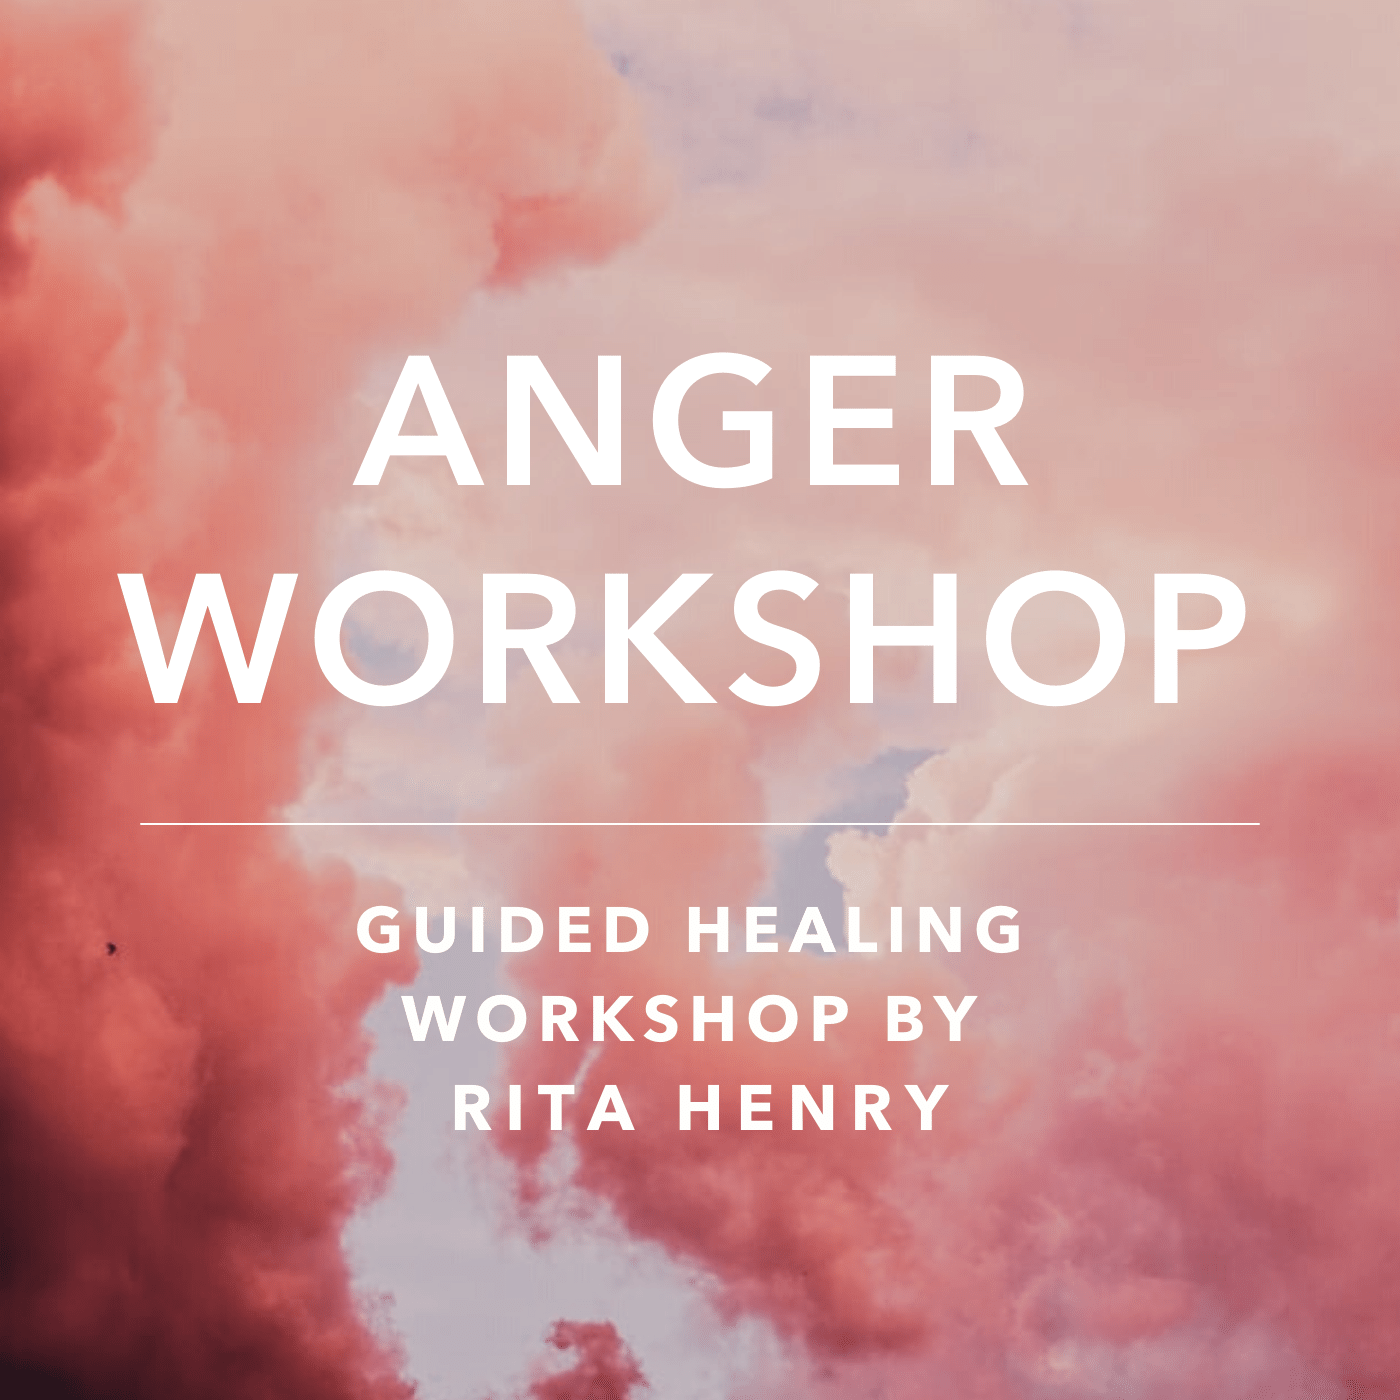 Workshop Recording: Dealing with Angry People